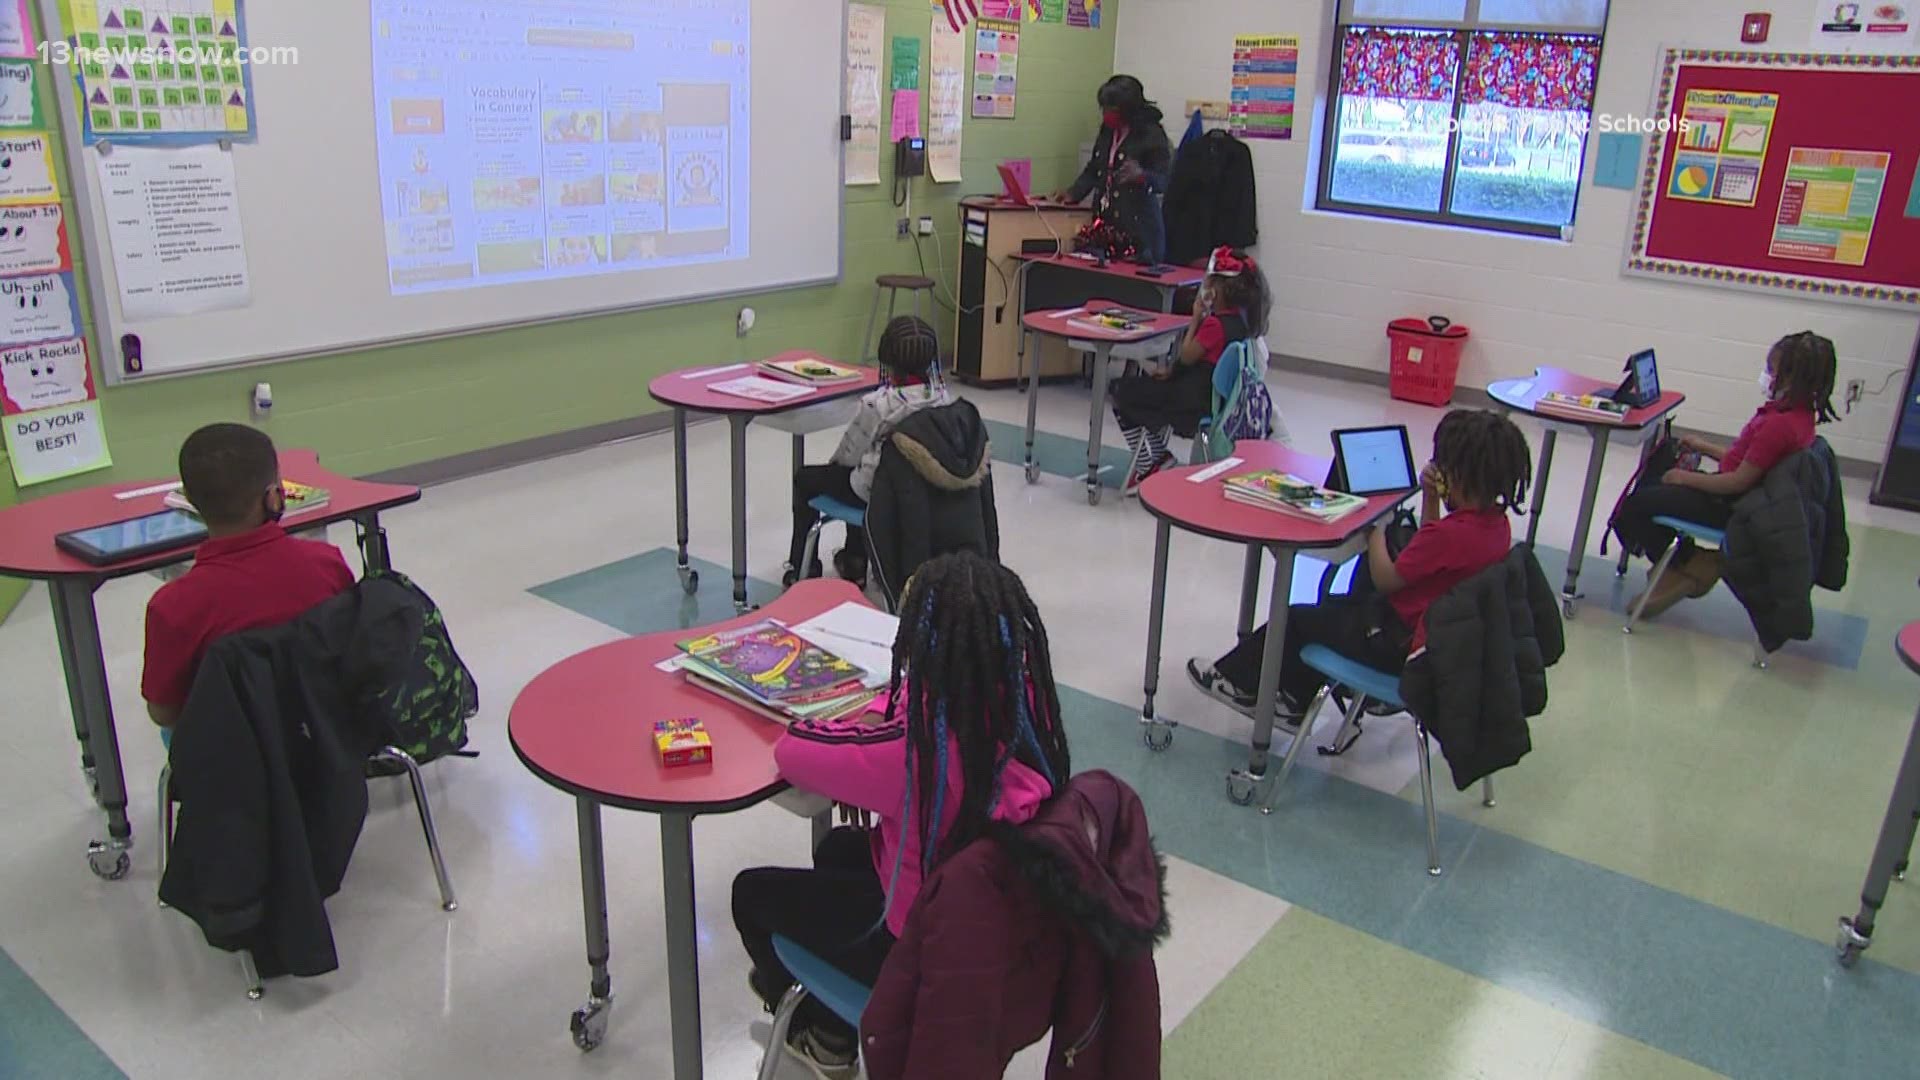 The pilot program is set to launch later this month and will run until the end of the school year. School divisions would have to opt in to participate.